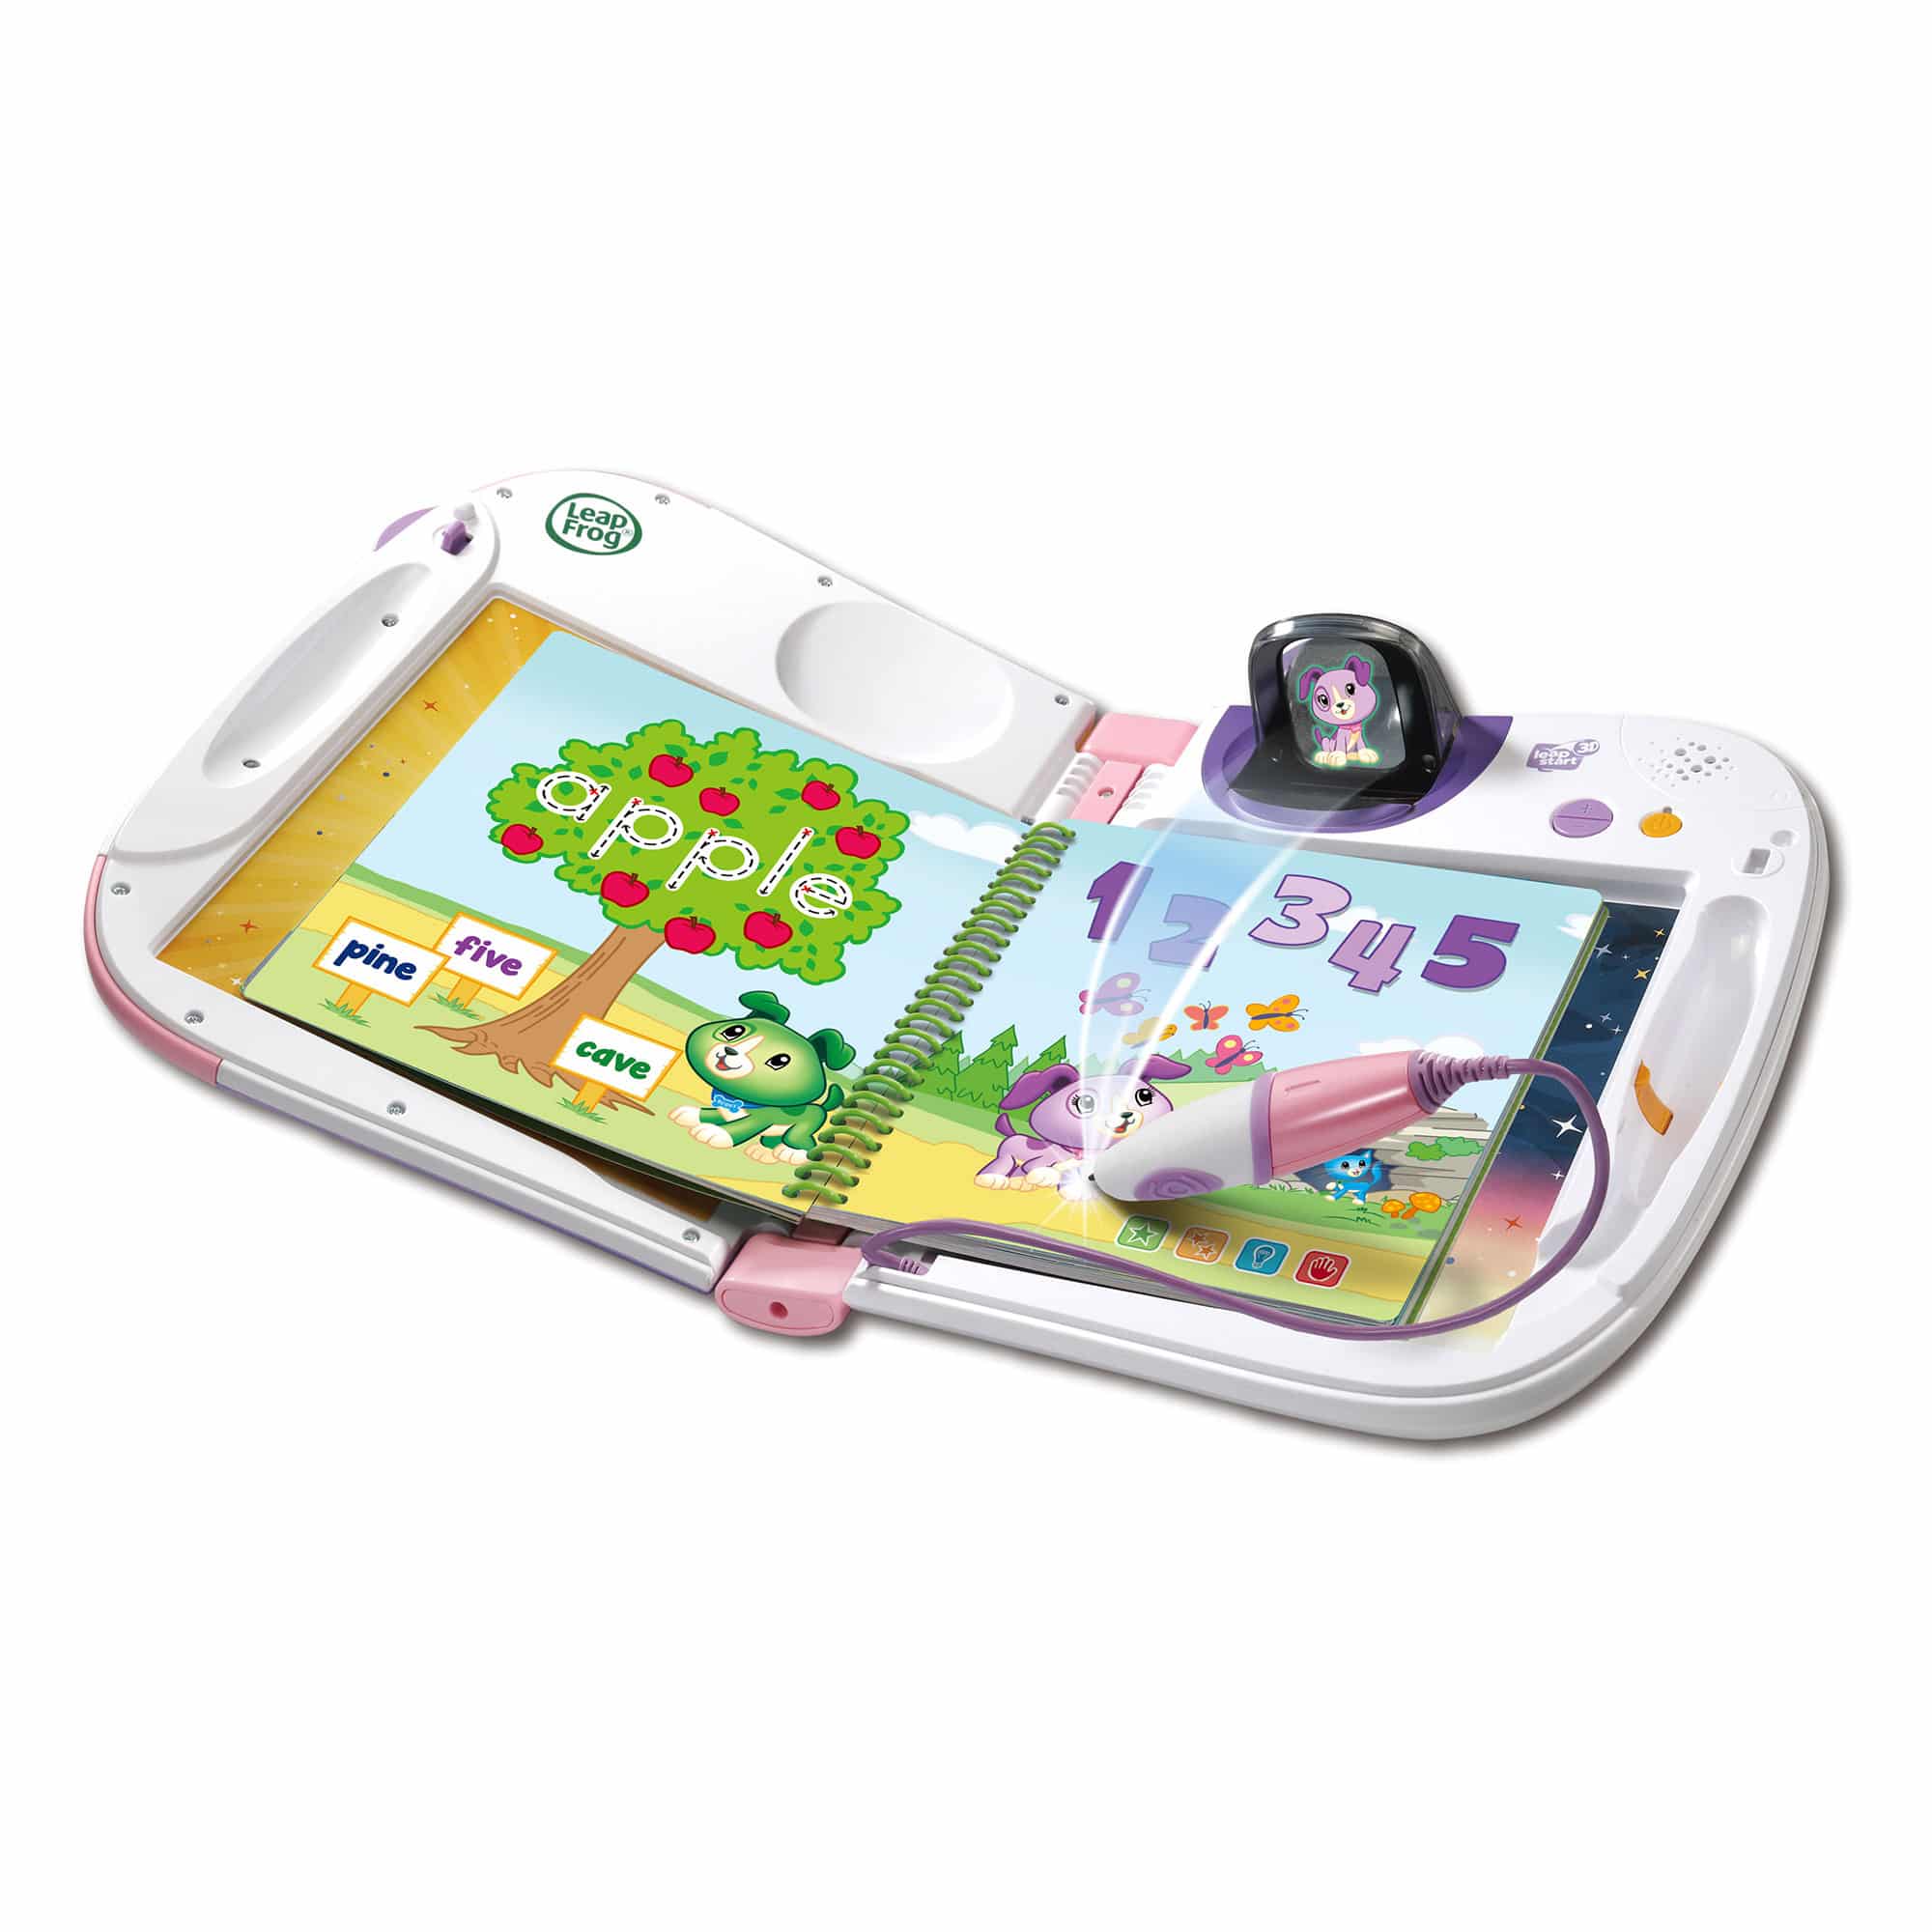 LeapFrog - LeapStart 3D Interactive Learning System - Pink